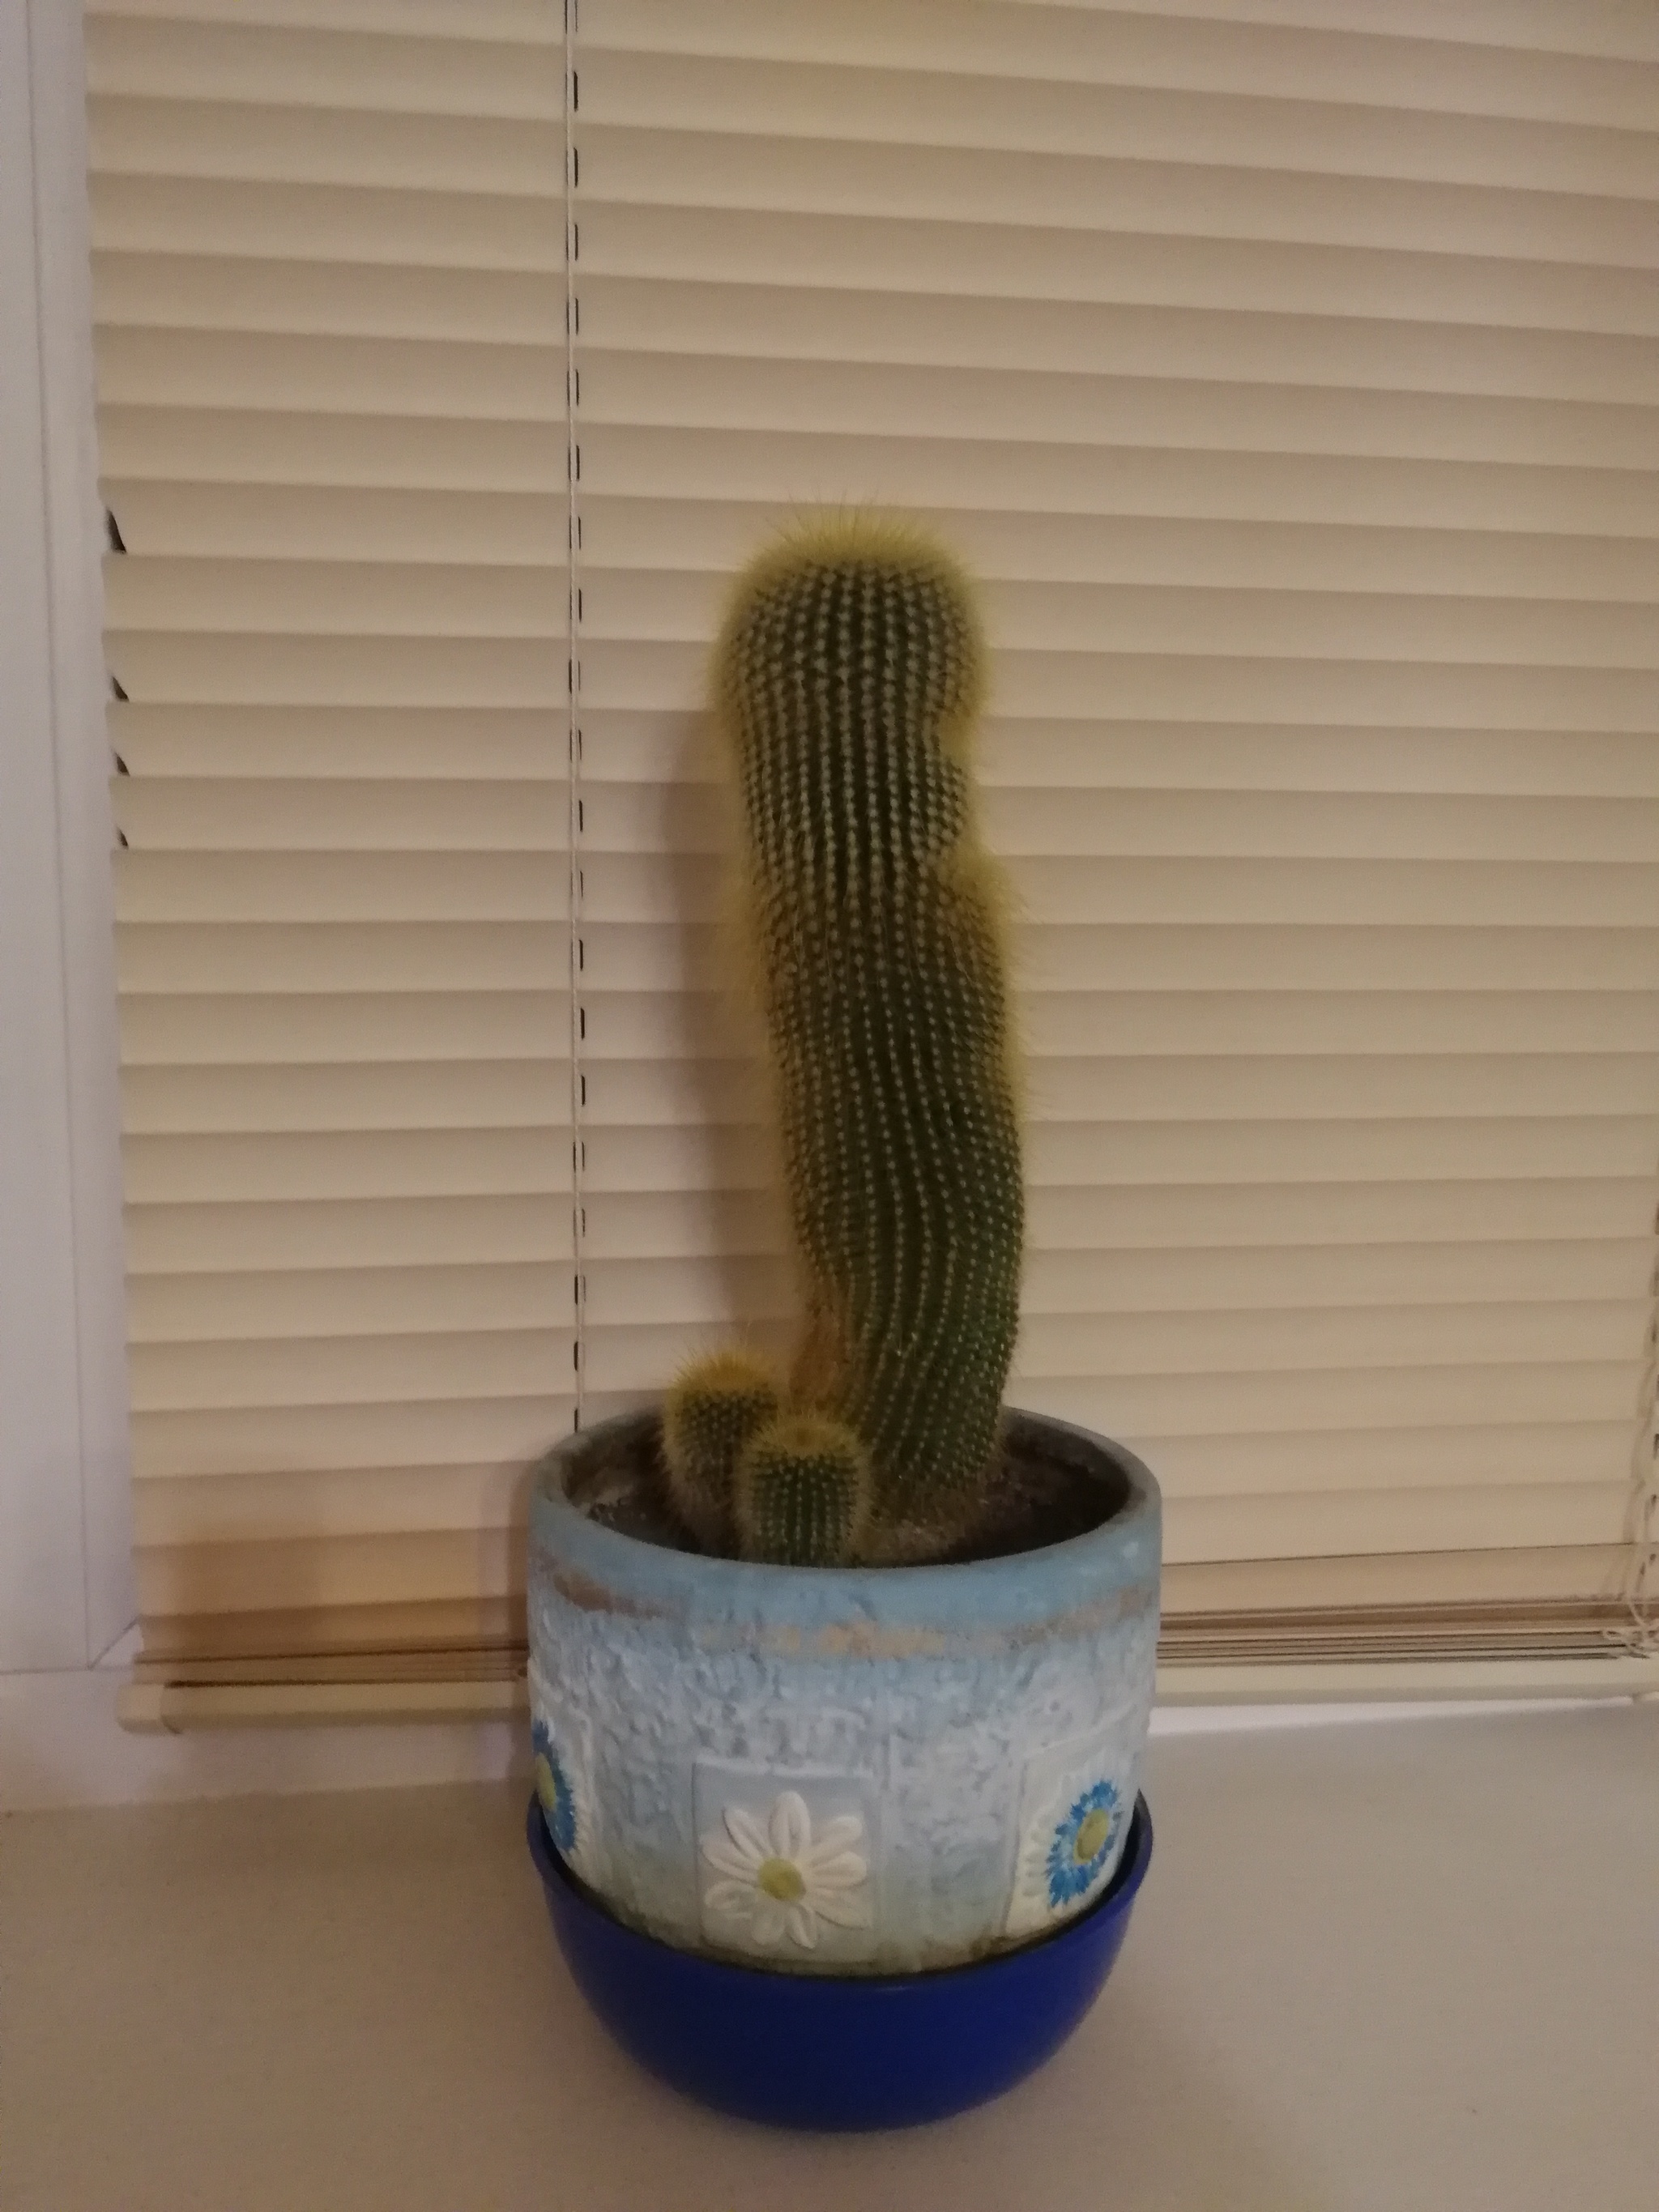 Reply to post - Cactus, It seemed, A real man